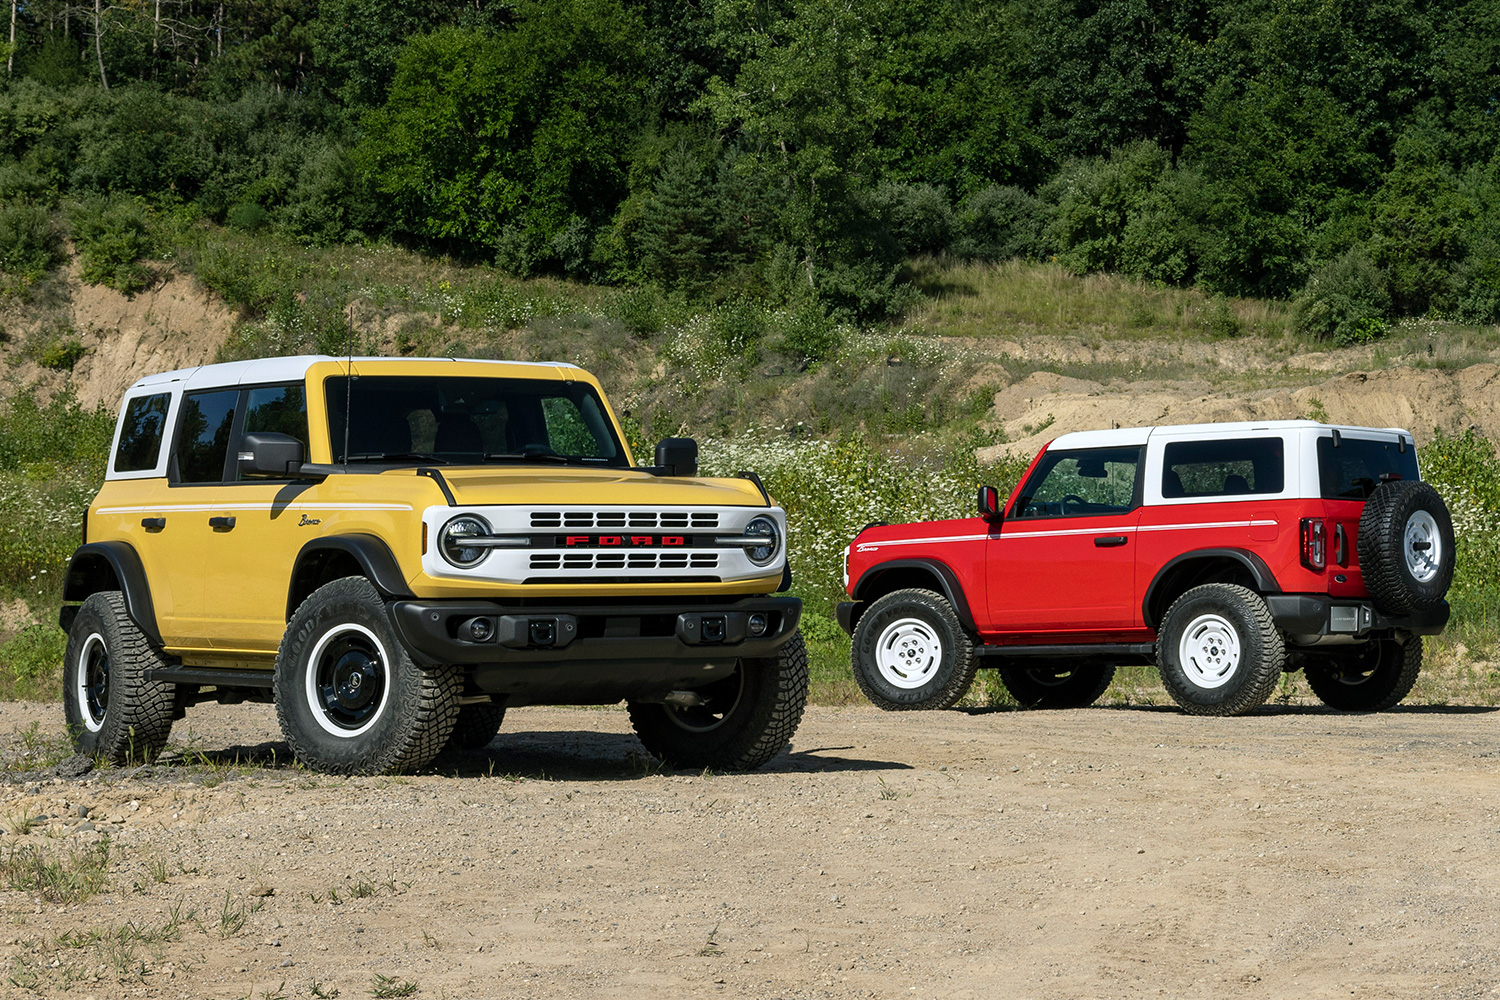 Two Ford Bronco Heritage Edition models, one in yellow and one in red, both with white tops